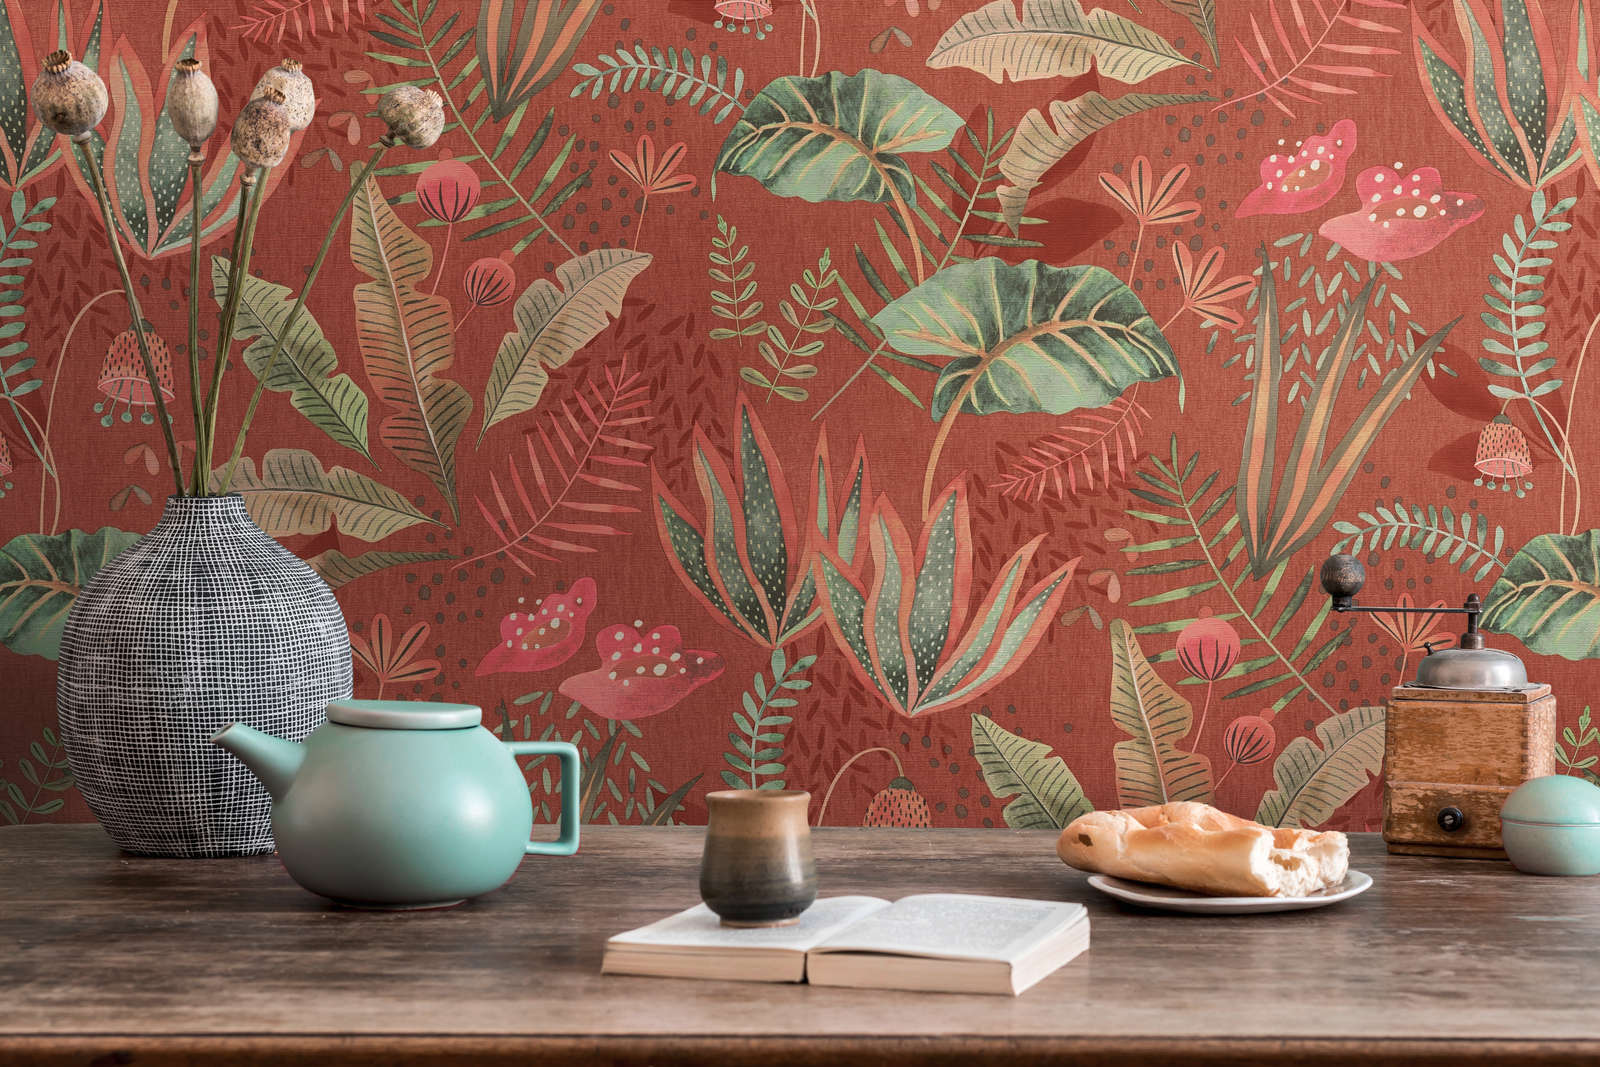             Floral wallpaper with mixed leaves slightly textured, matt - red, orange, green
        